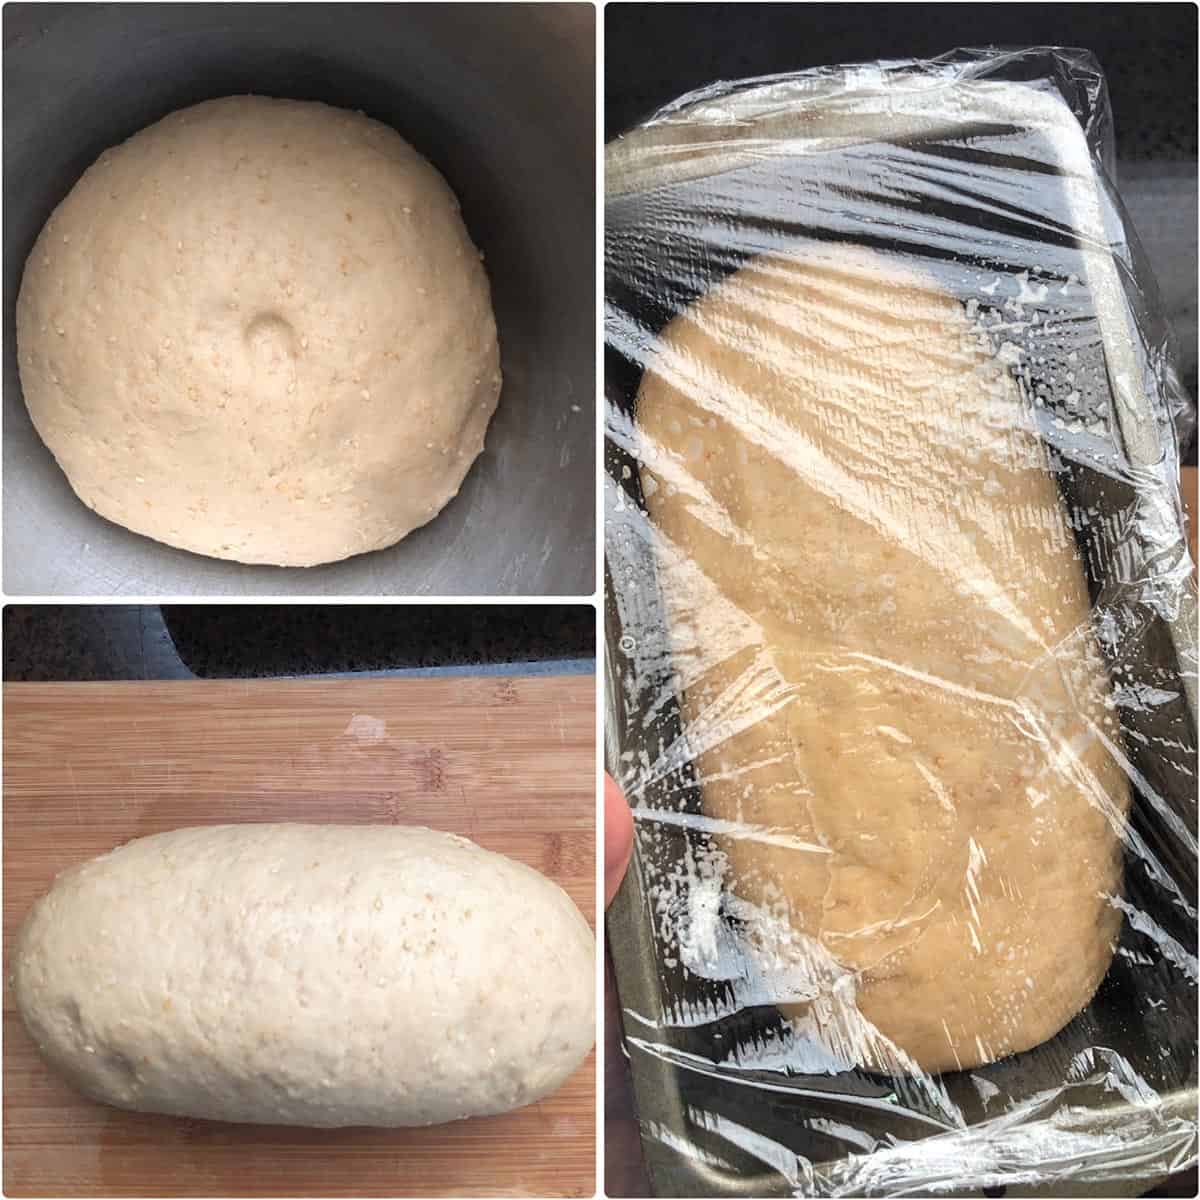 Risen dough, shaped into a loaf and placed in a loaf pan